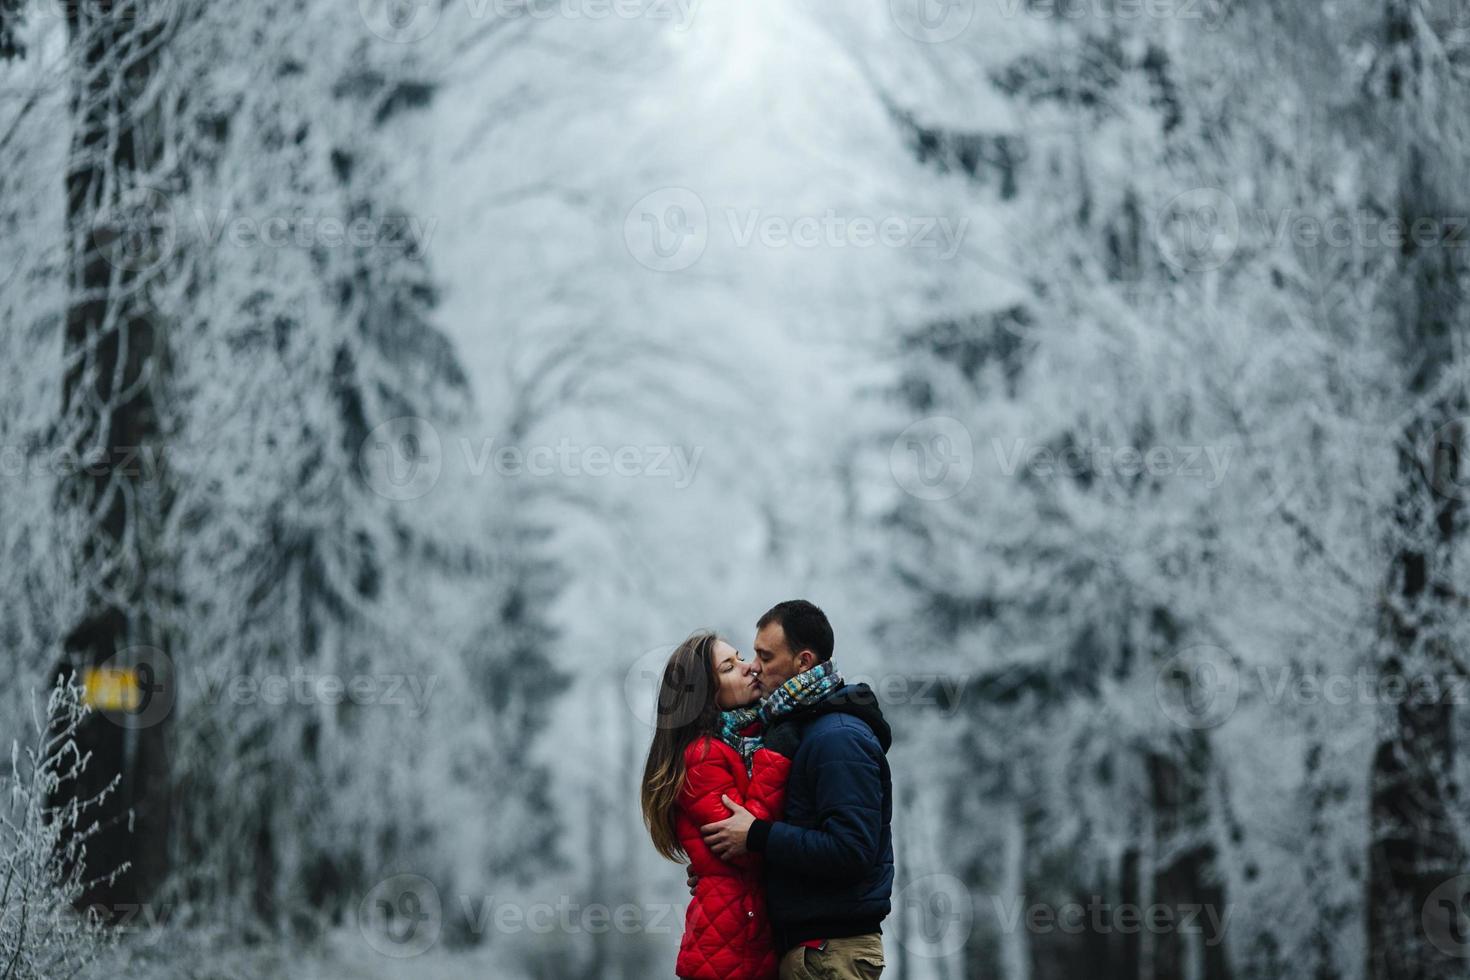 couple walking on a winter park photo